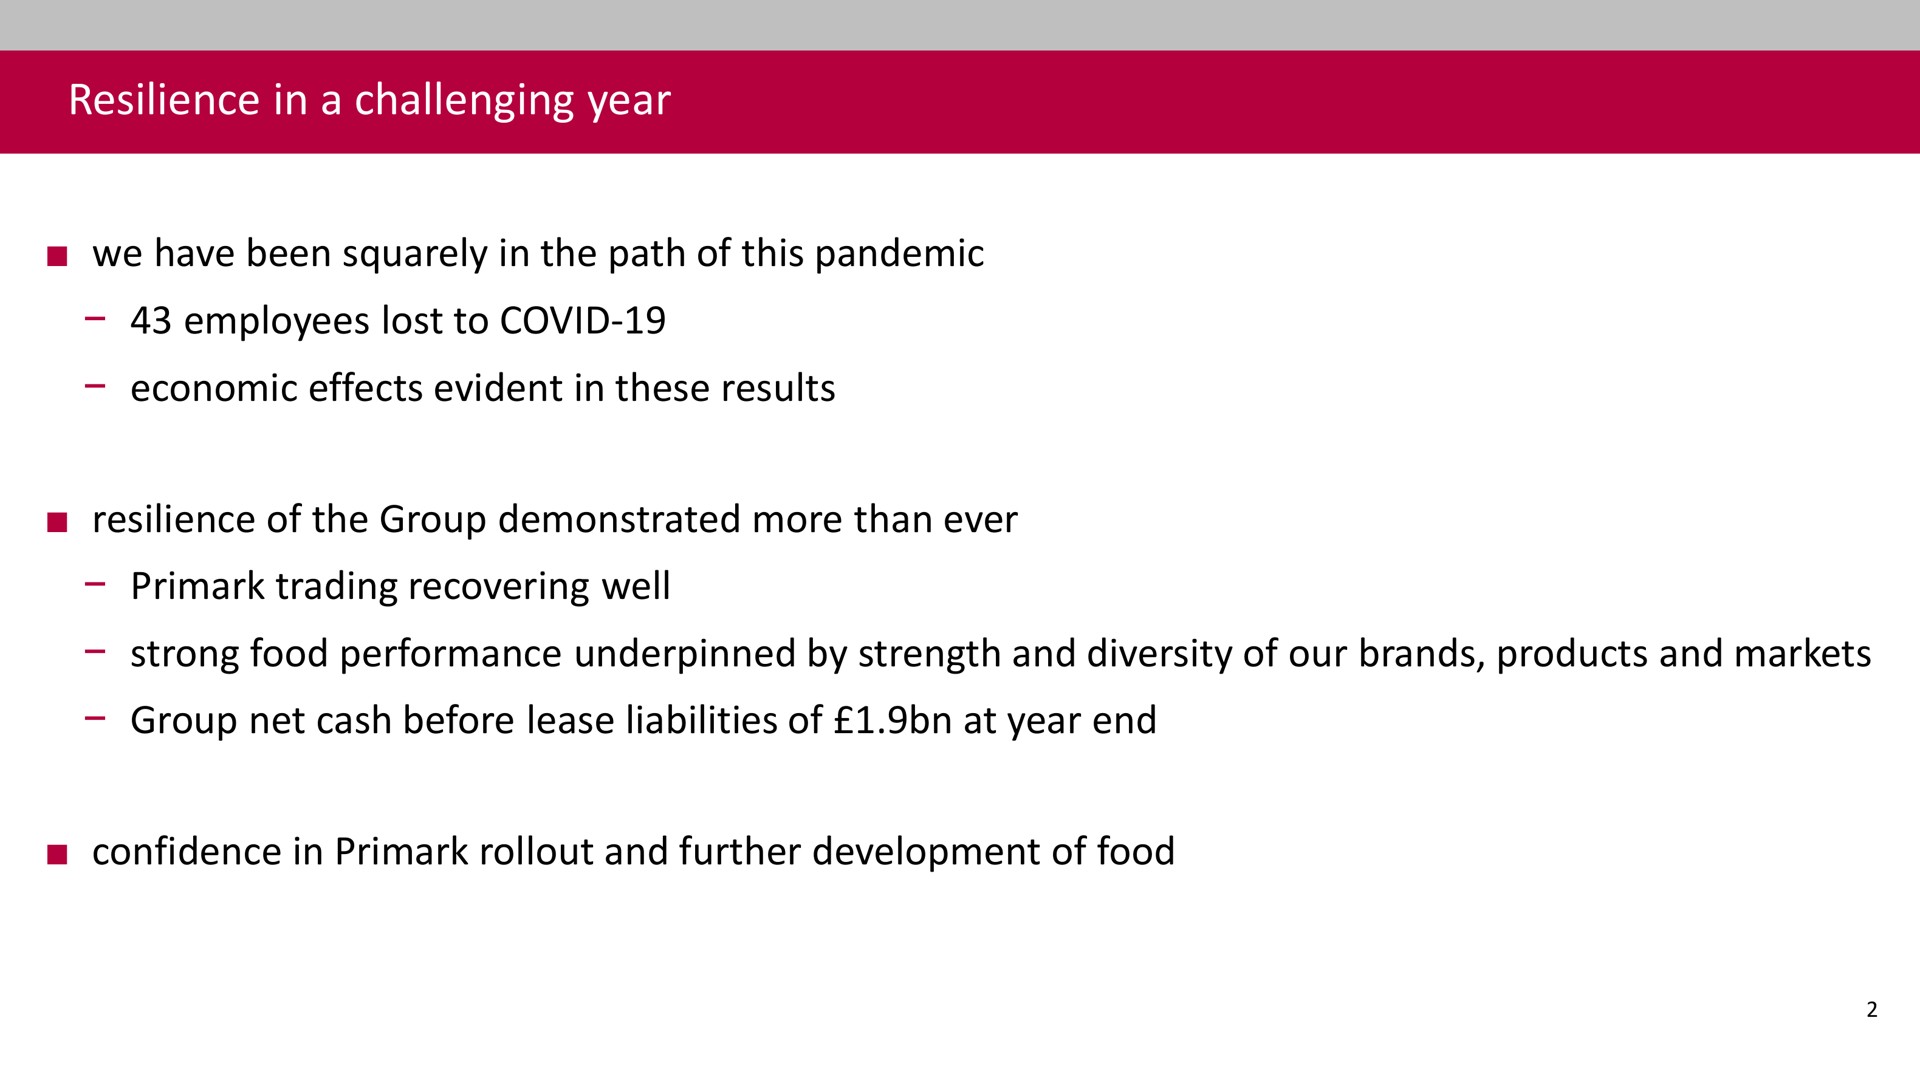 resilience in a challenging year | Associated British Foods